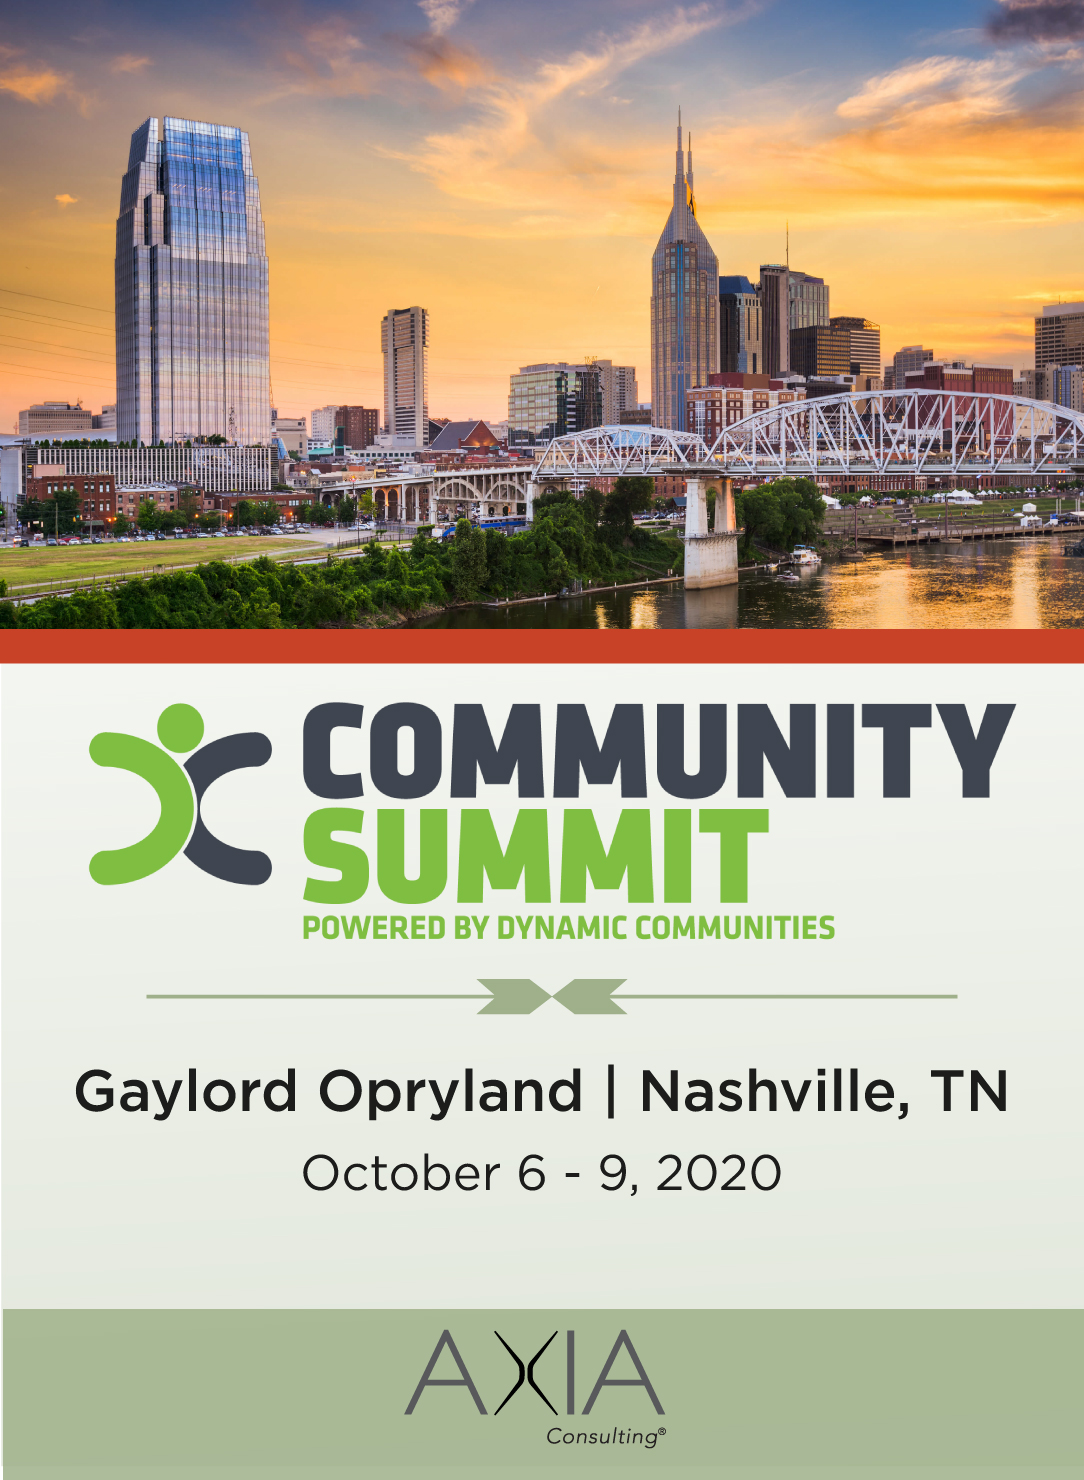 Community Summit AXIA Consulting